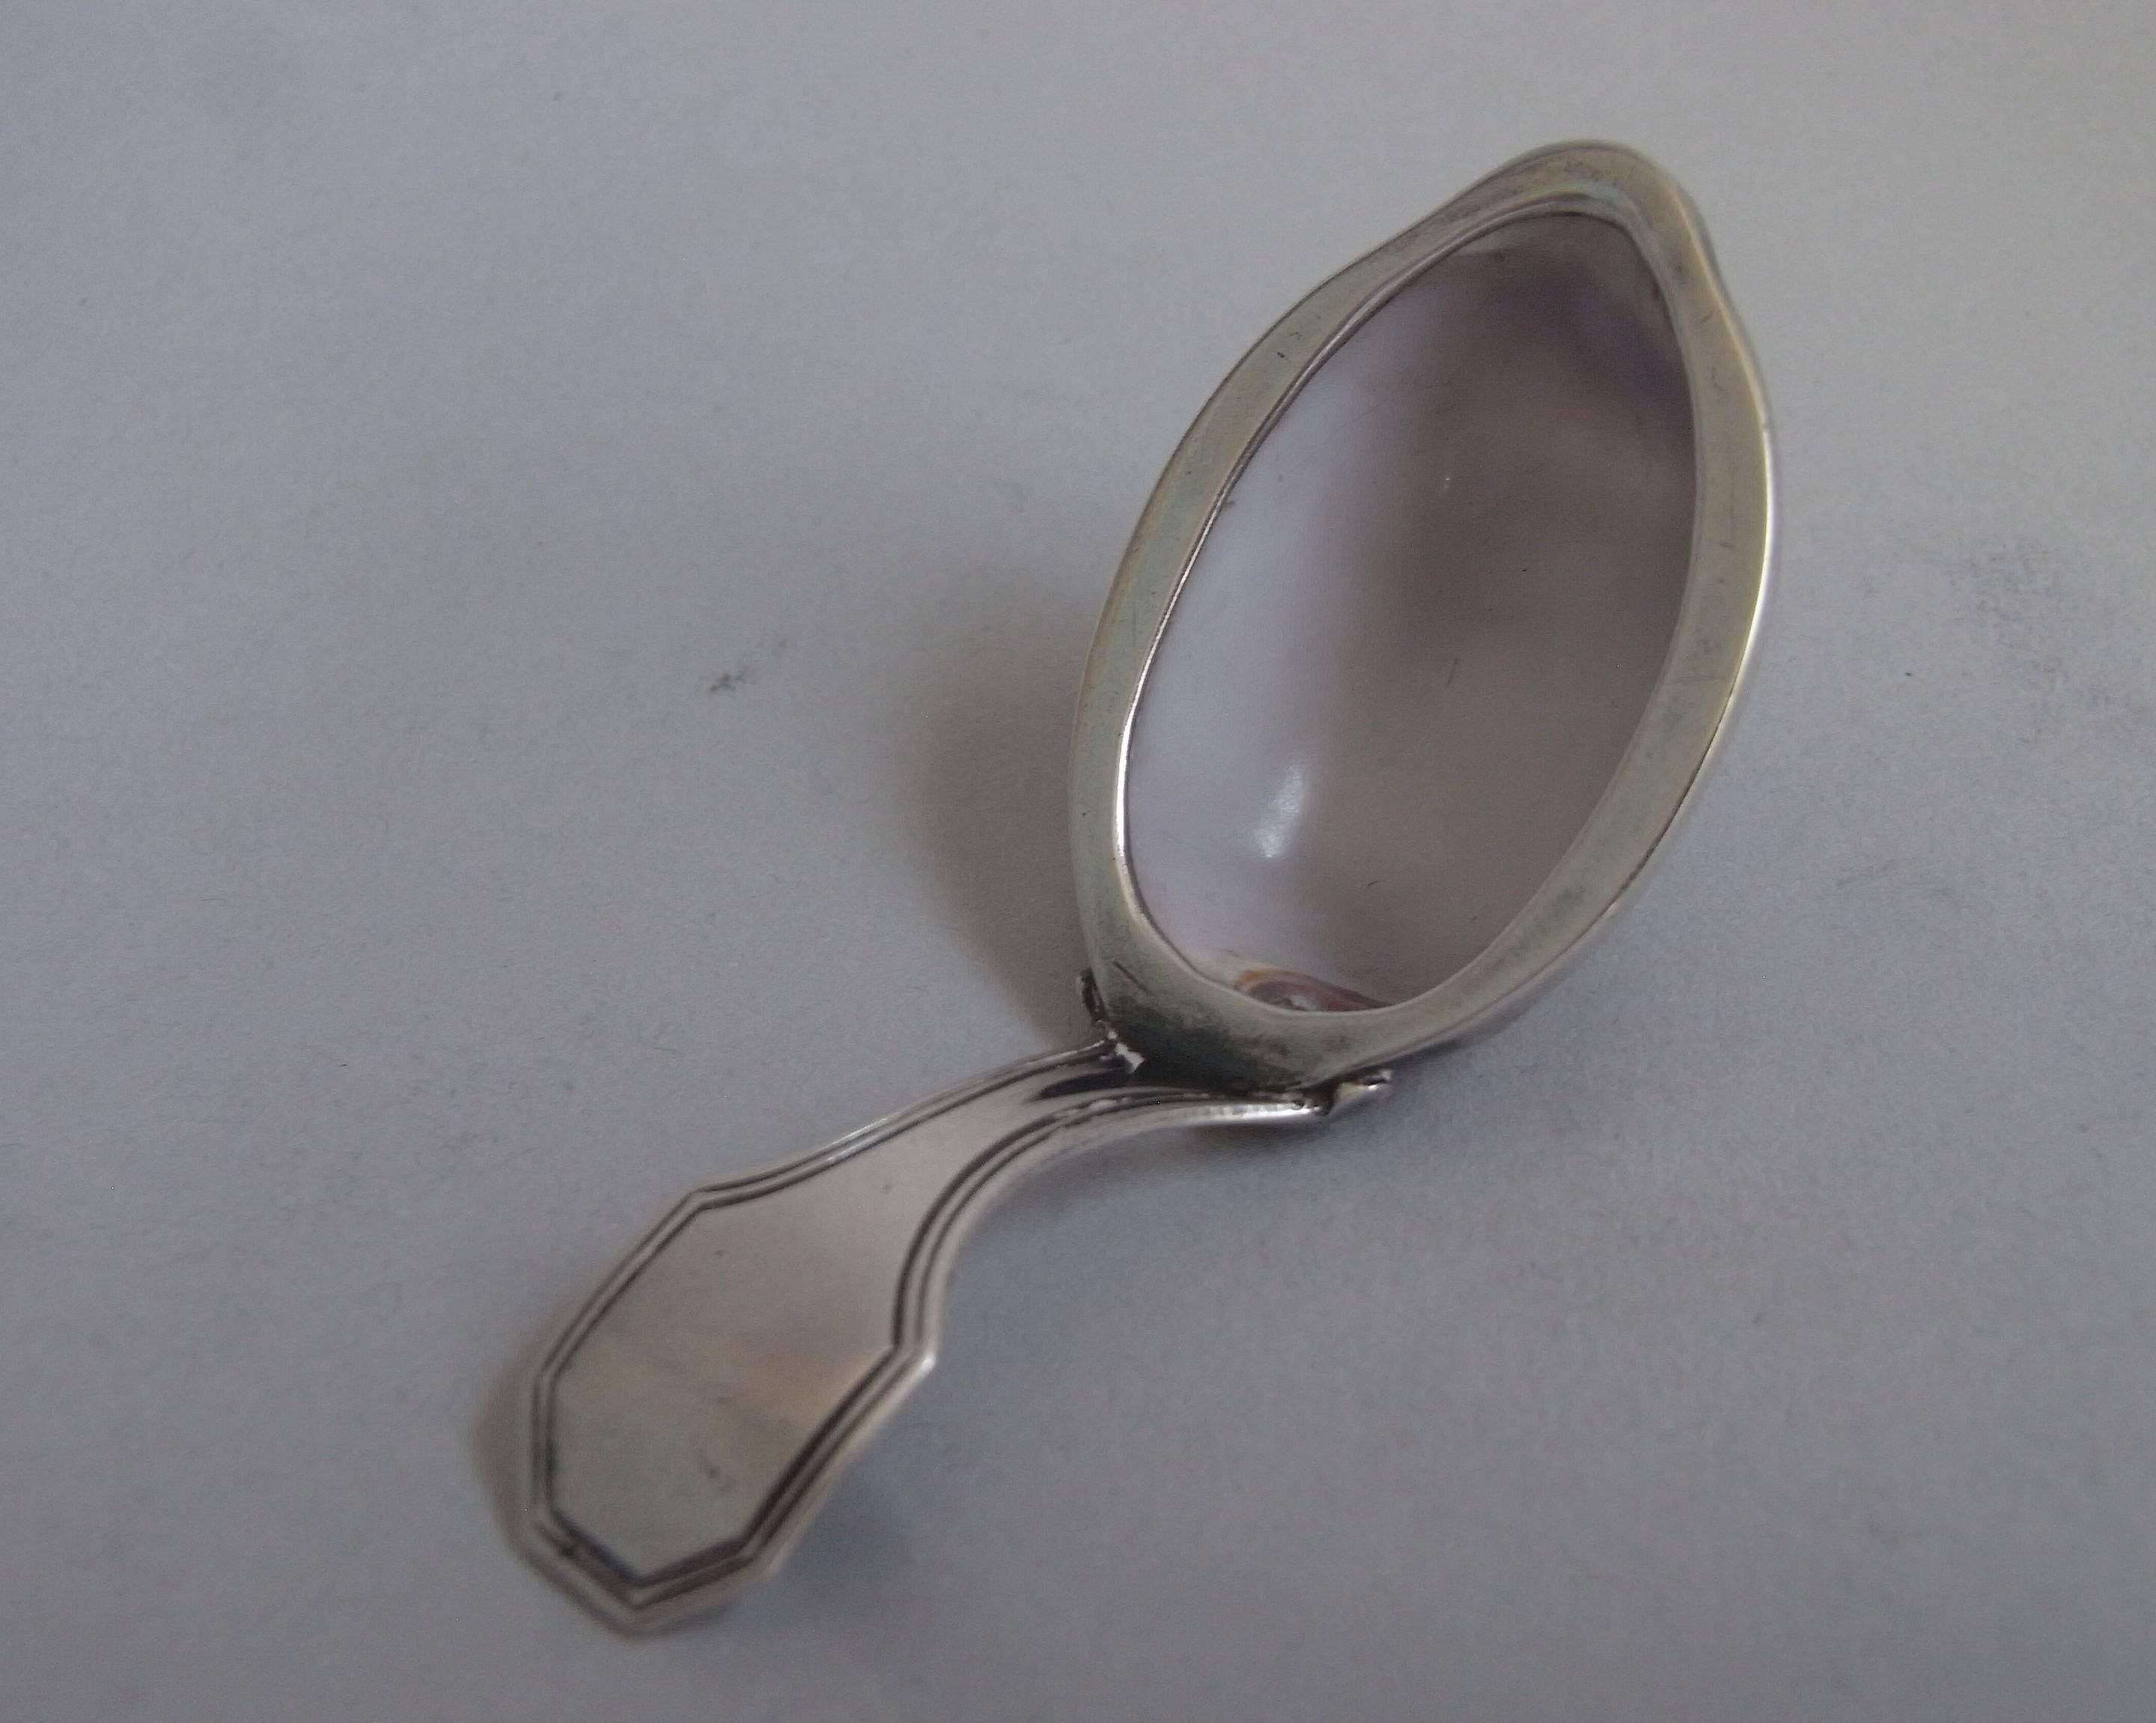 The bowl of the Caddy Spoon is formed as a beautifully shaded natural Cowrie Shell. The shell bowl has a plain silver rim and the bifurated handle displays a double thread edge. This example is in excellent condition and is marked with the maker's